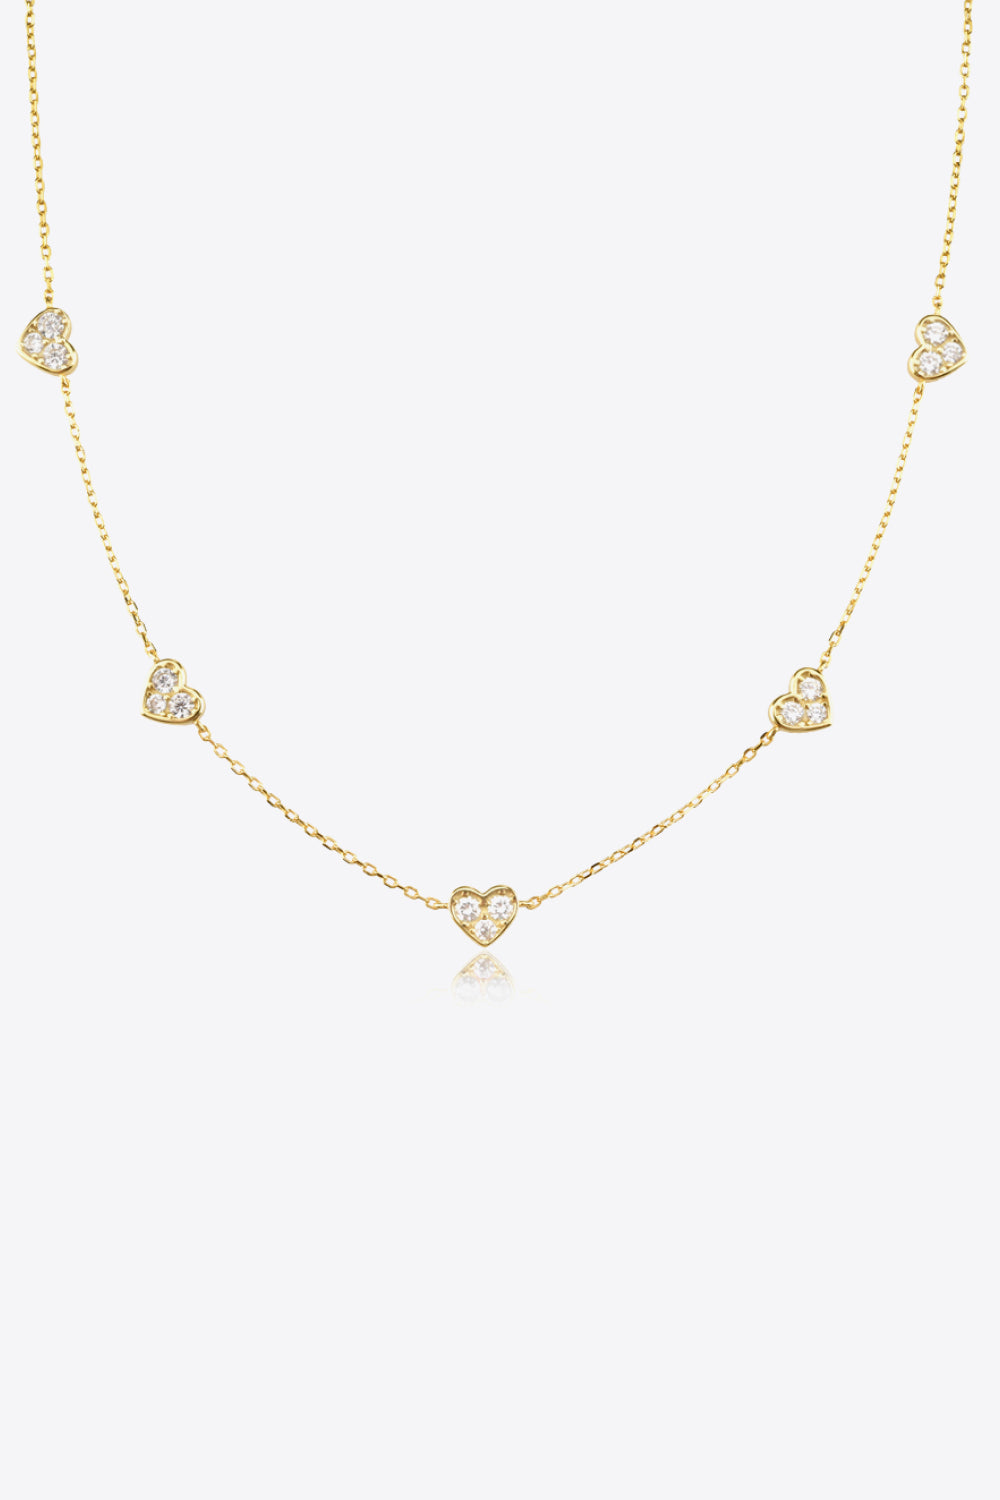 Wear our heart necklace as a symbol of love and affection, a perfect gift for someone special.